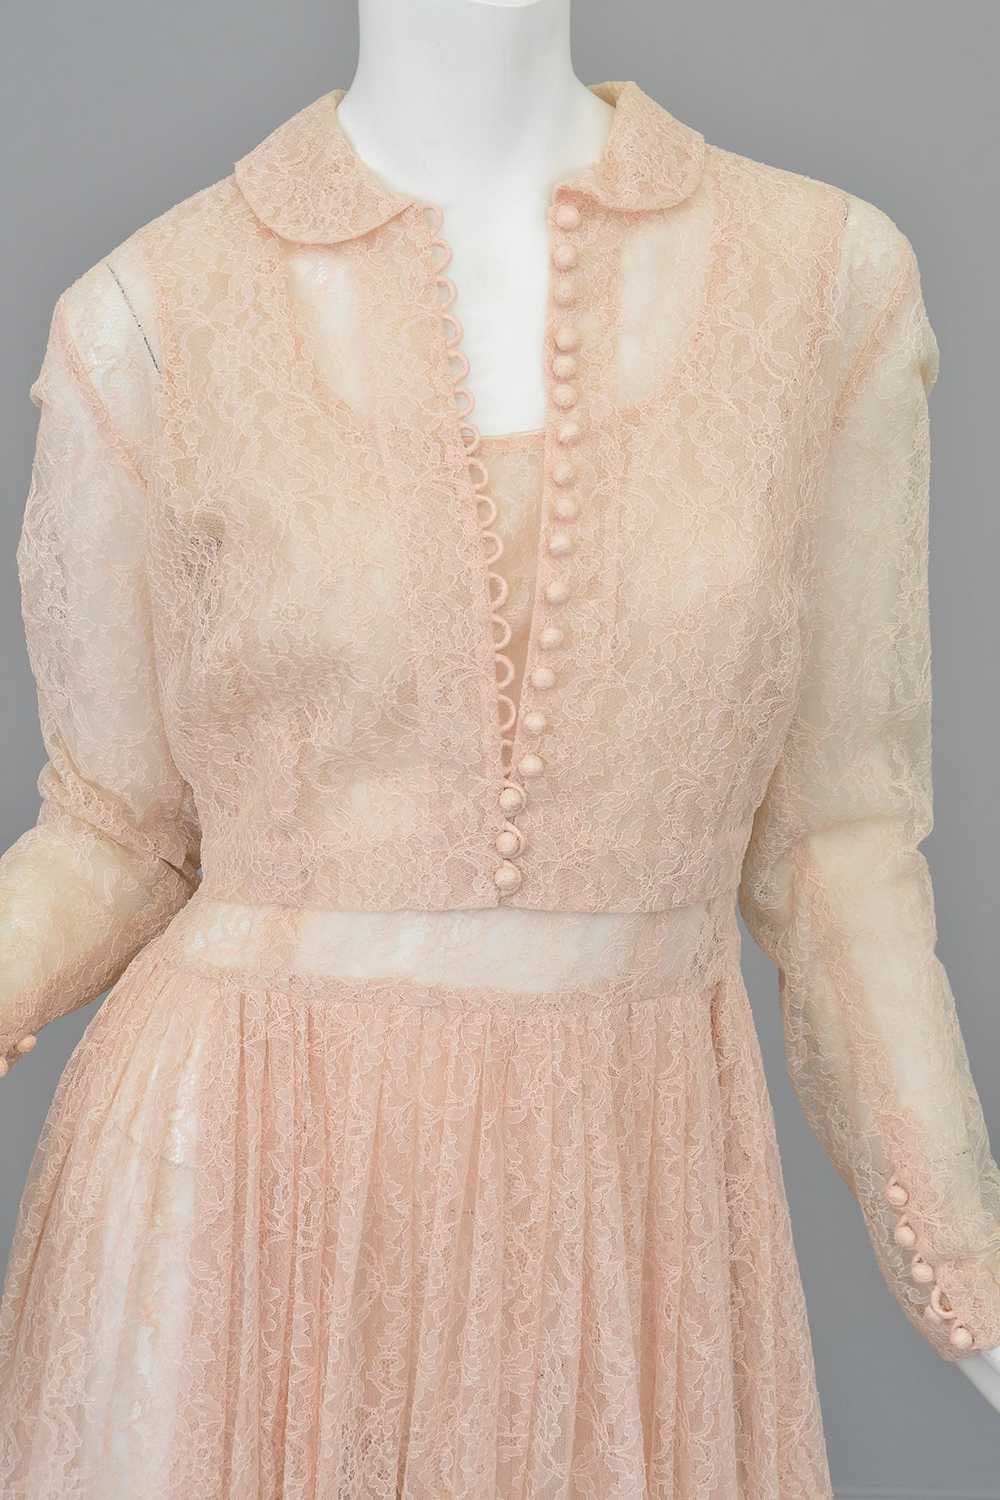 1940s 50s Sheer Light Pink Embroidered Lace Gown - image 9